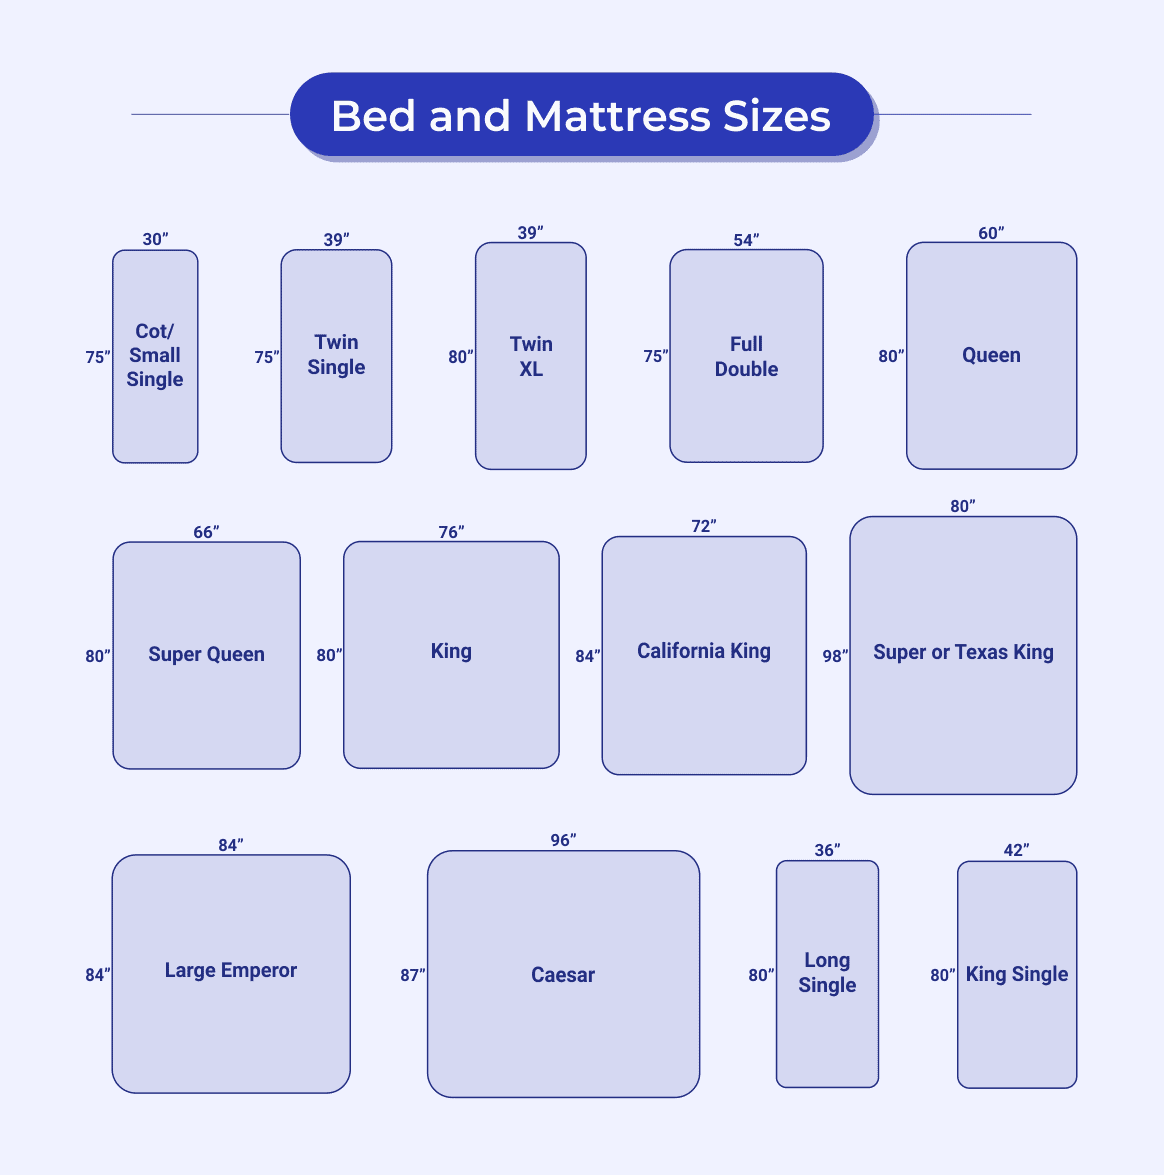 Mattress And Bed Sizes What Are The, How Many Inches Is A King Size Bed